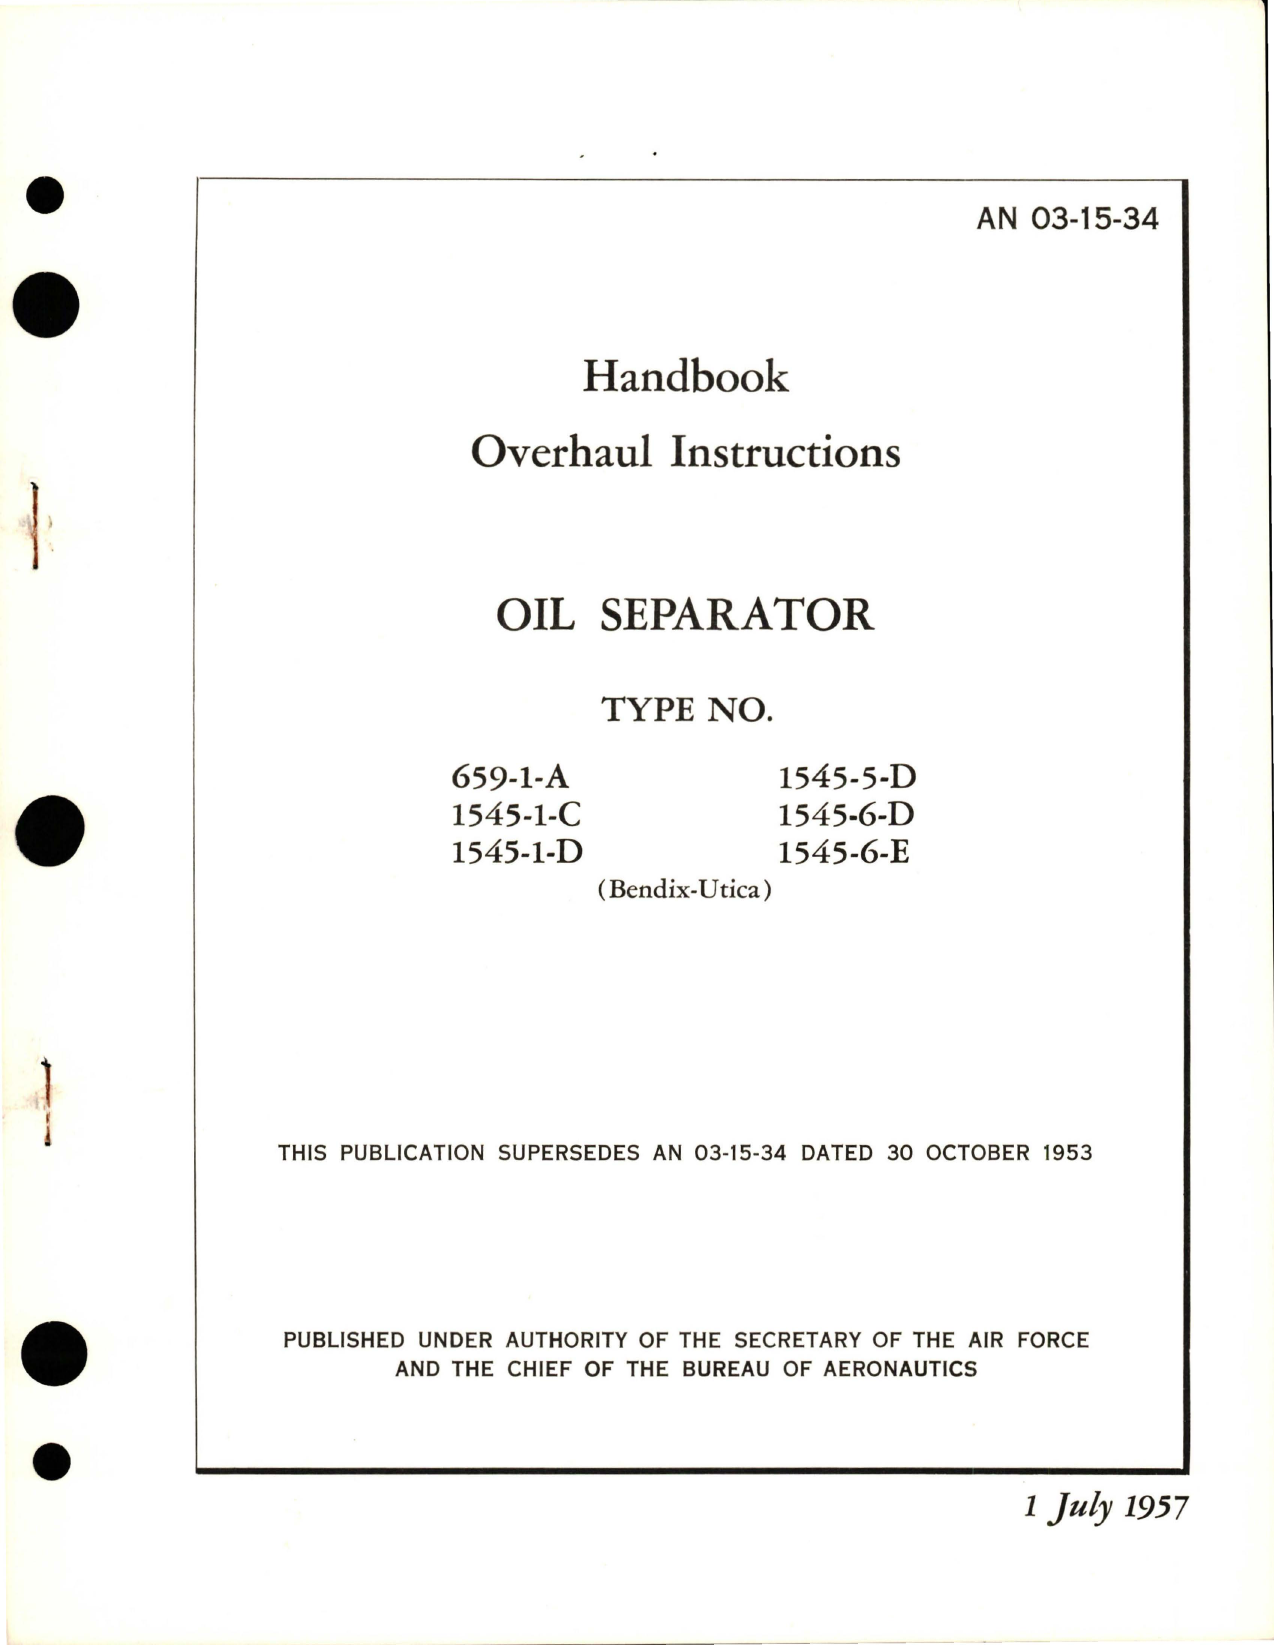 Sample page 1 from AirCorps Library document: Overhaul Instructions for Oil Separator - Parts 659-1-A, 1545-1-C, 1545-1-D, 1545-5-D, 1545-6-D, and 1545-6-E 